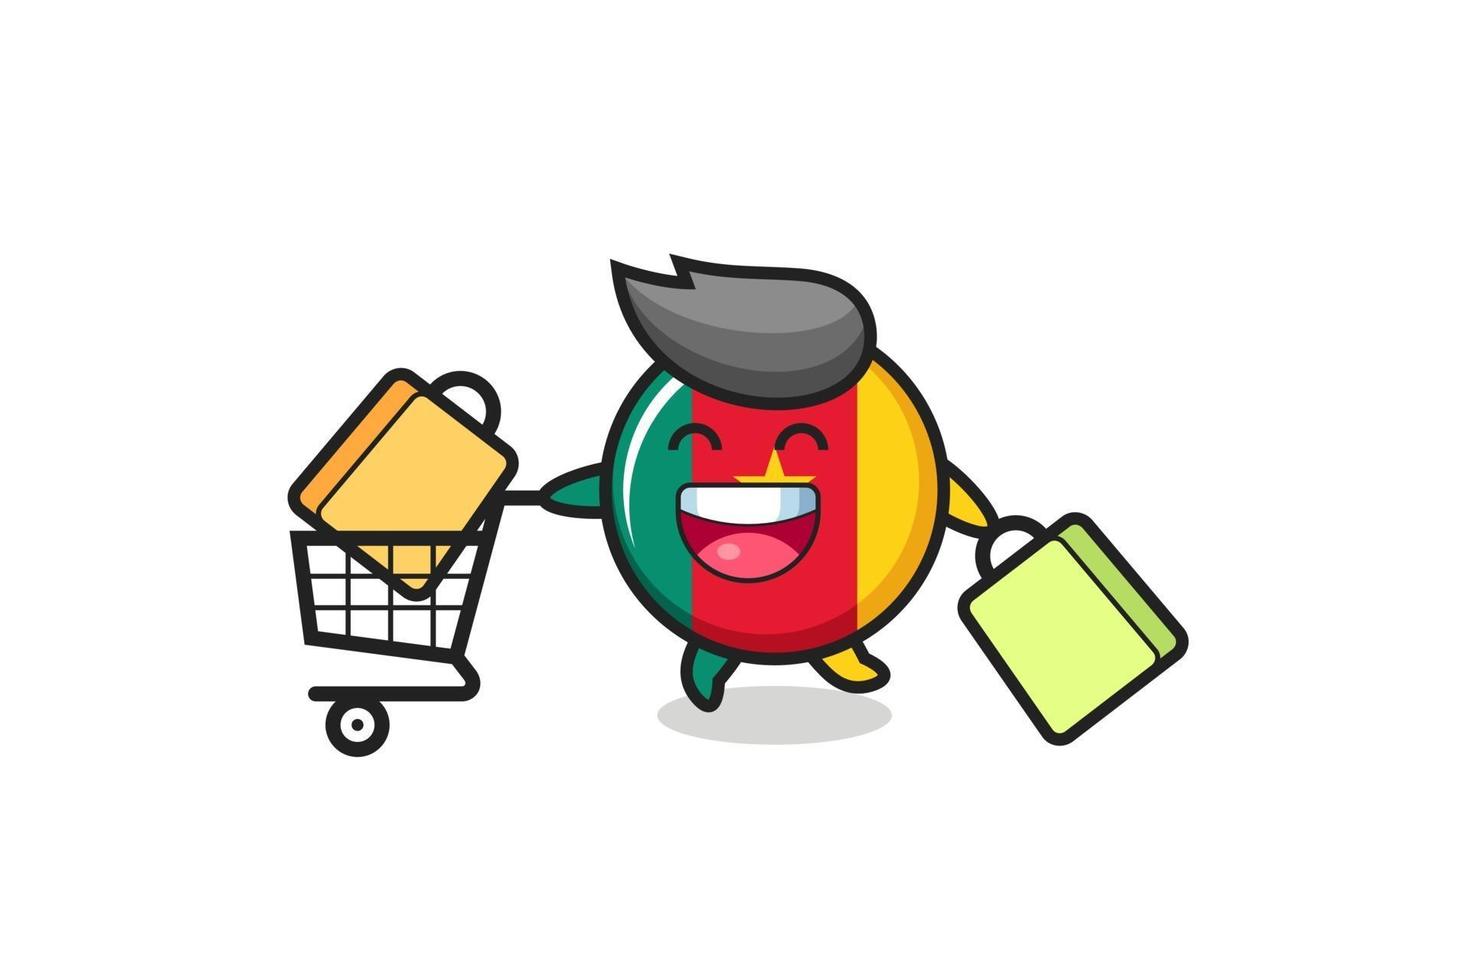 black Friday illustration with cute cameroon flag badge mascot vector